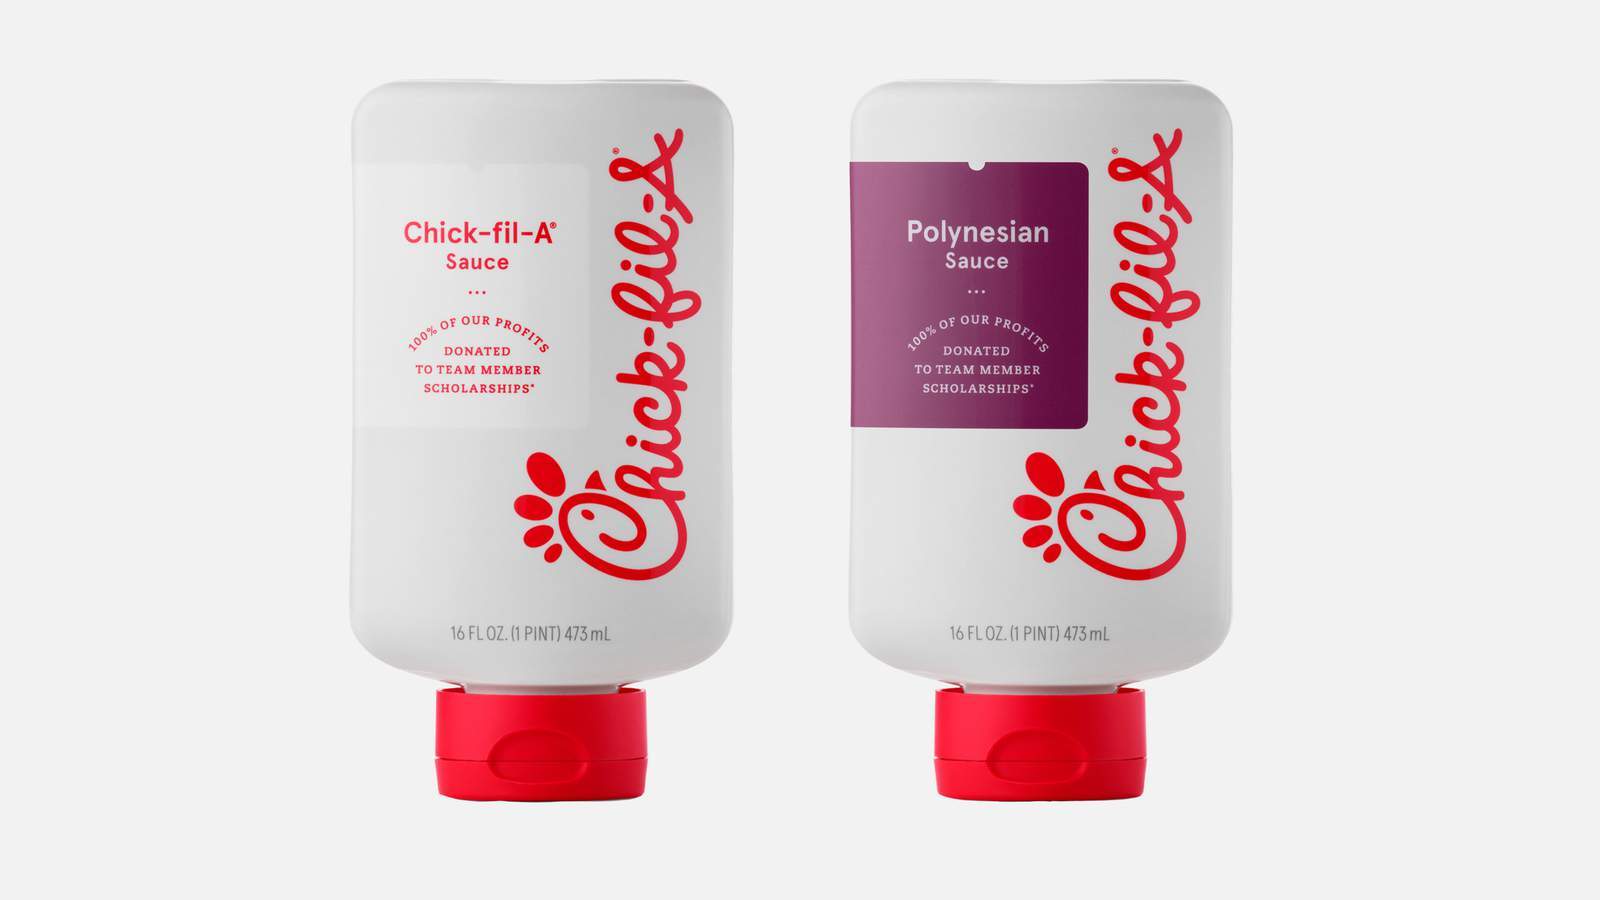 American restaurant chain Chick-fil-A to sell signature sauces in stores across the US